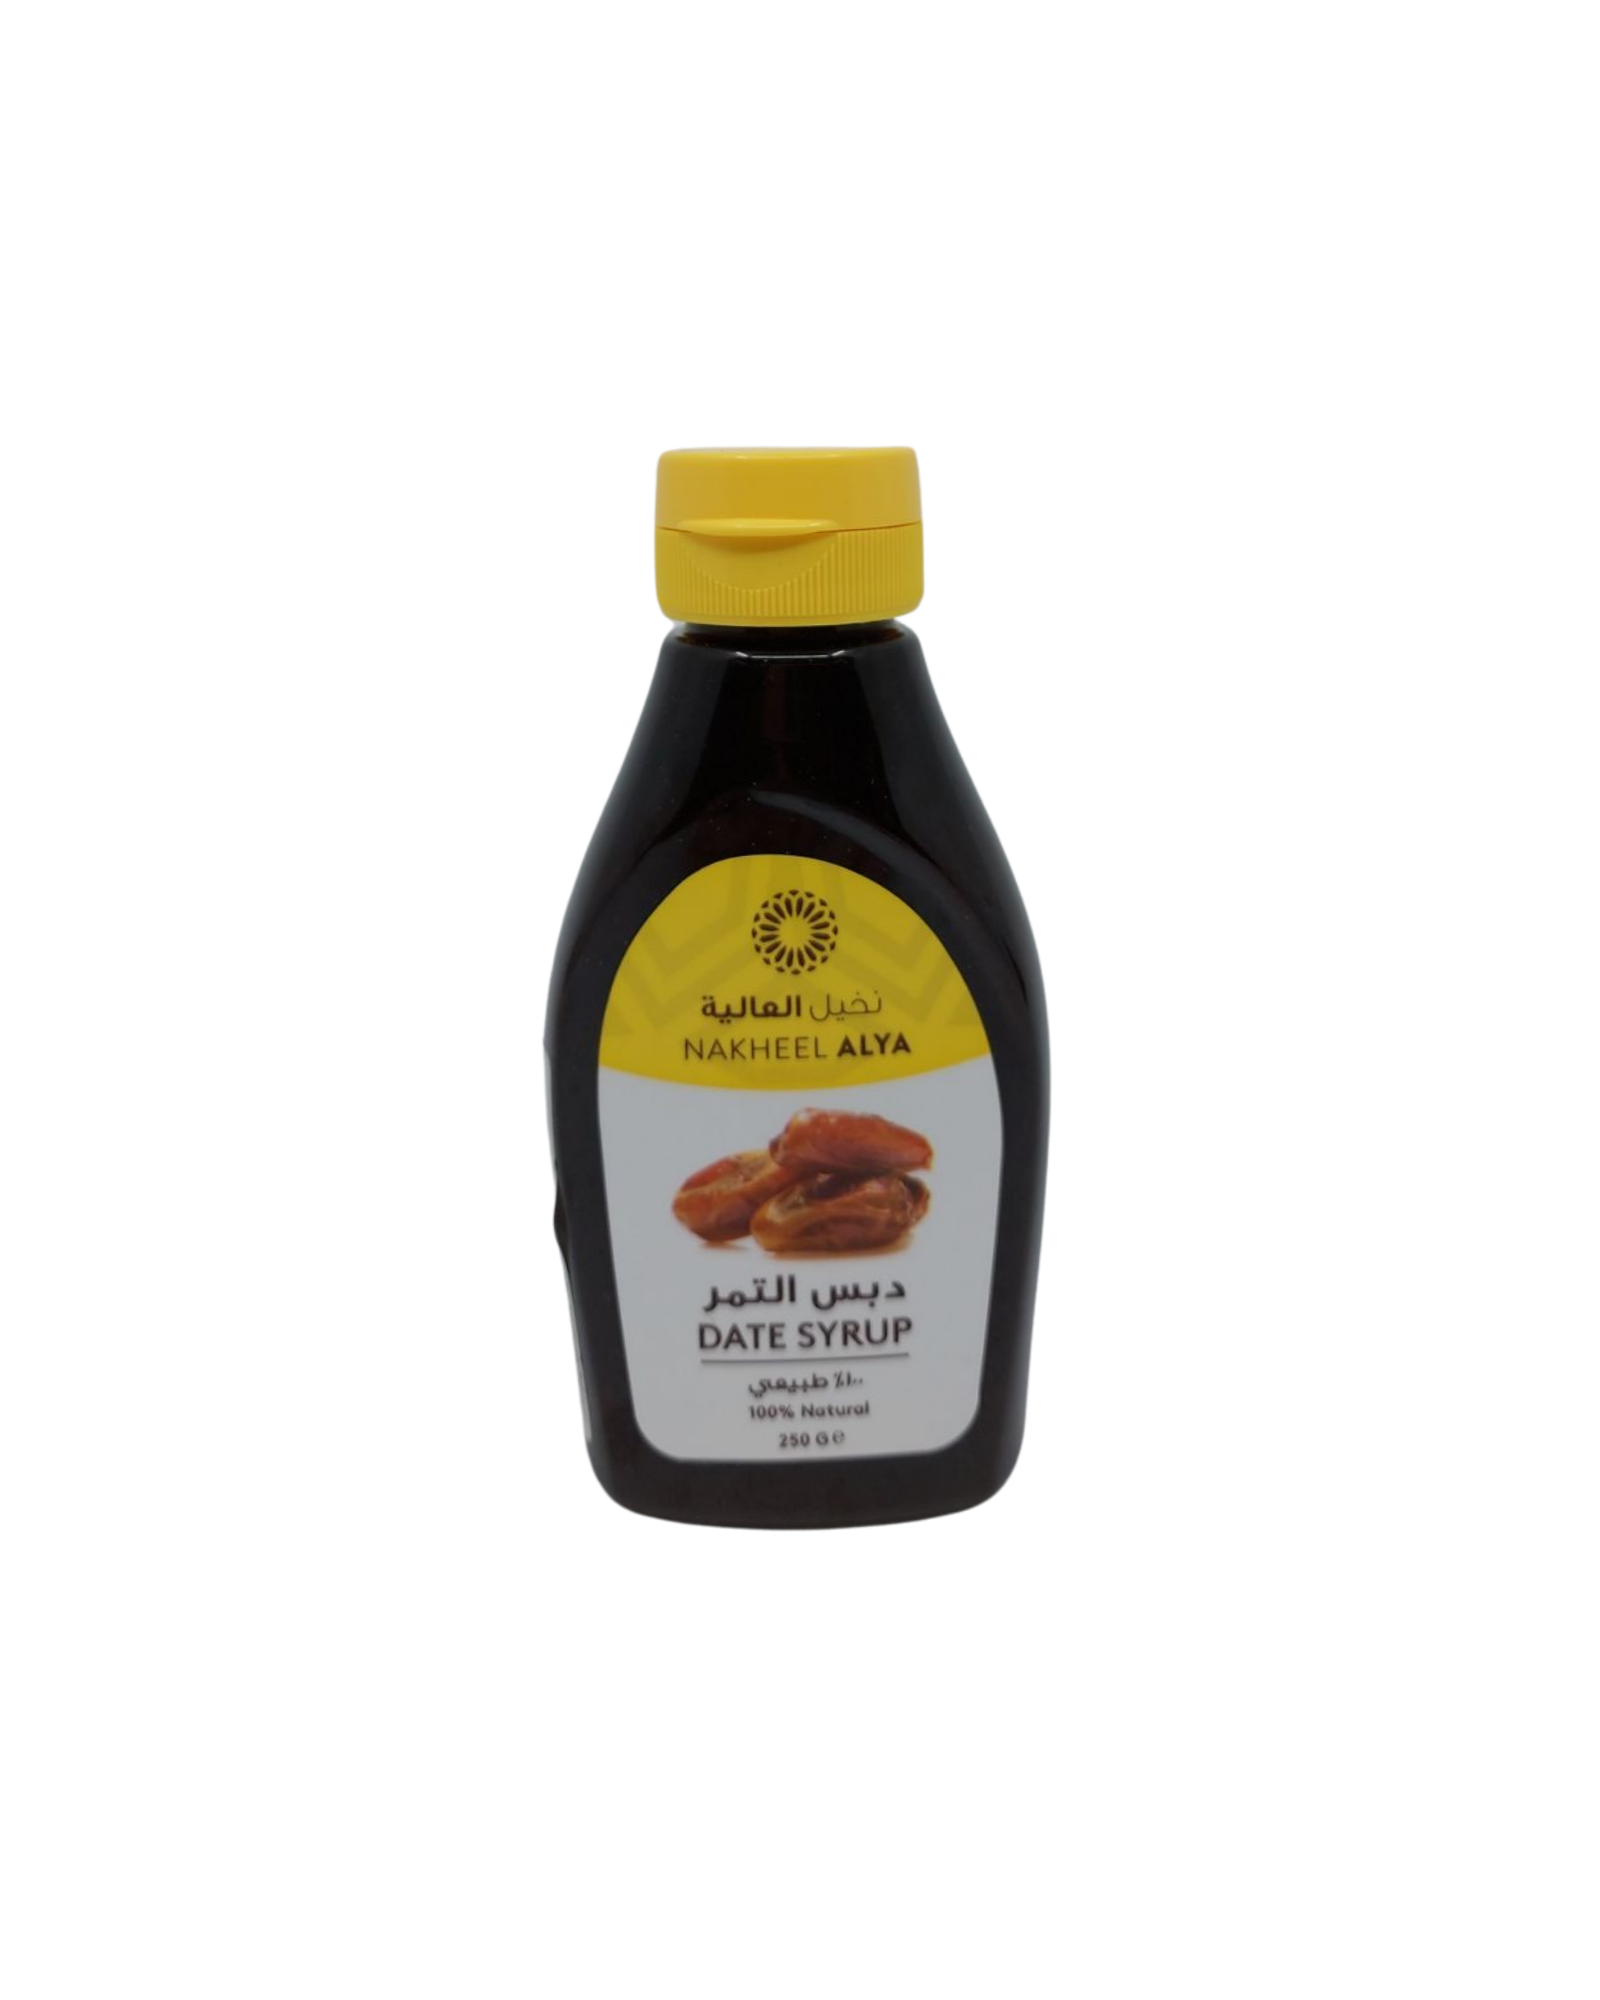 Date syrup (250g)